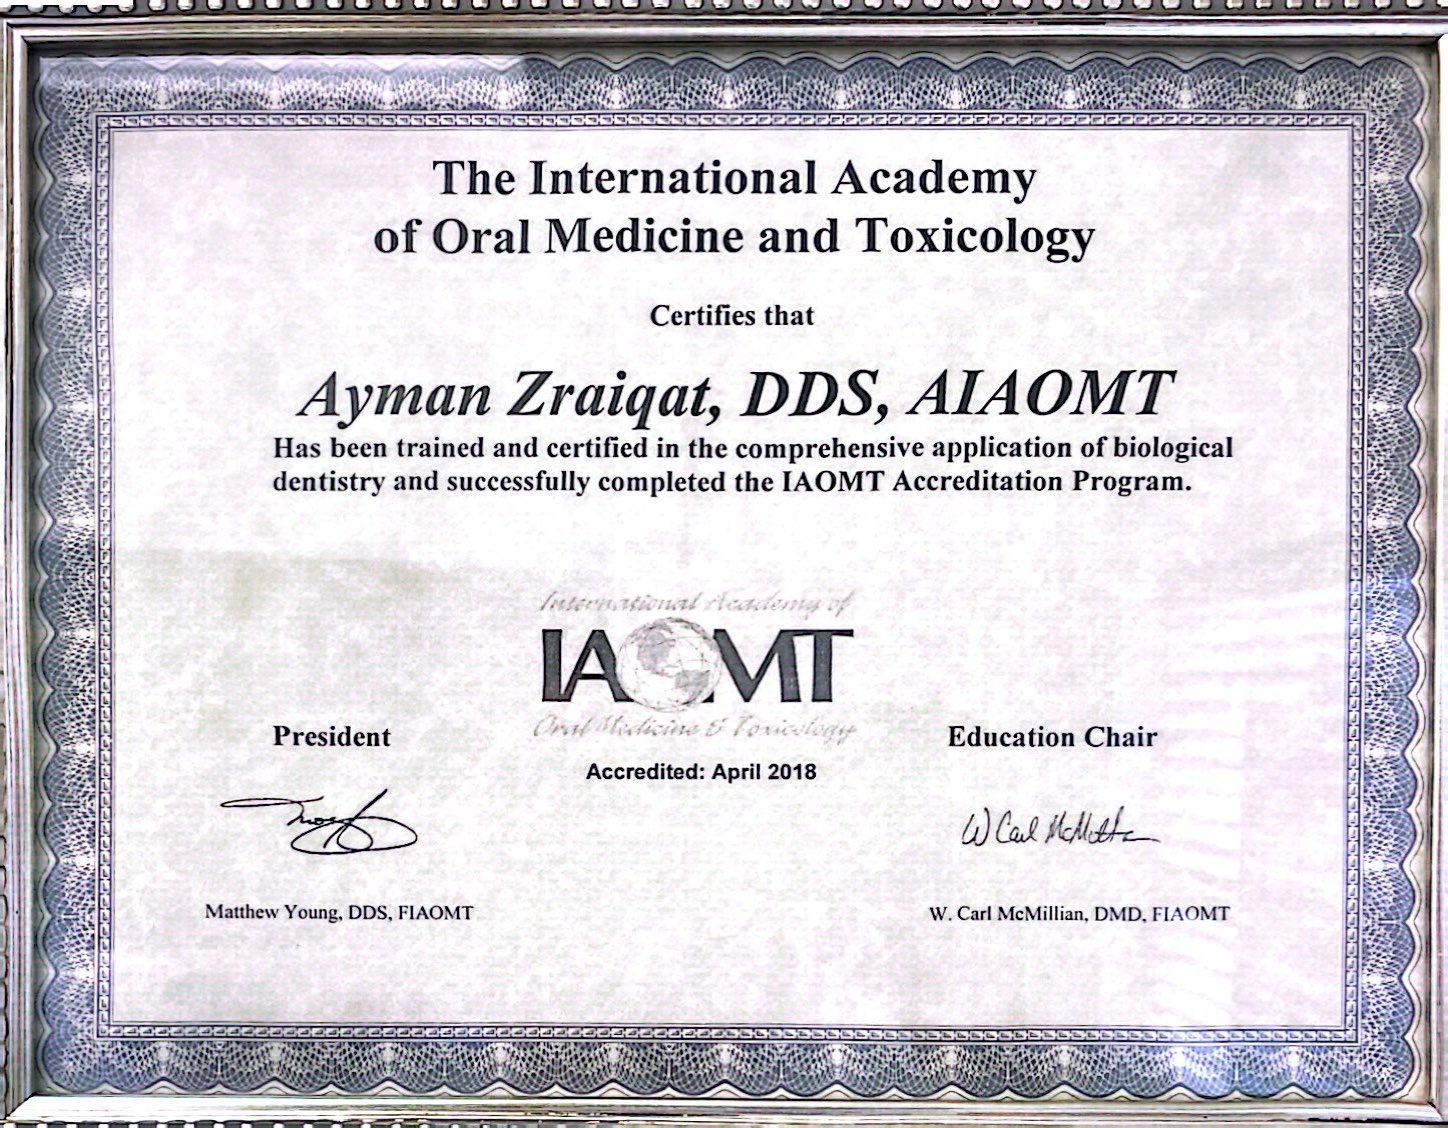 Certificate from the International Academy of Oral Medicine and Toxicology, awarded to Ayman Zraiqat, DDS, AIAOMT, for completing the IAOMT Accreditation Program.